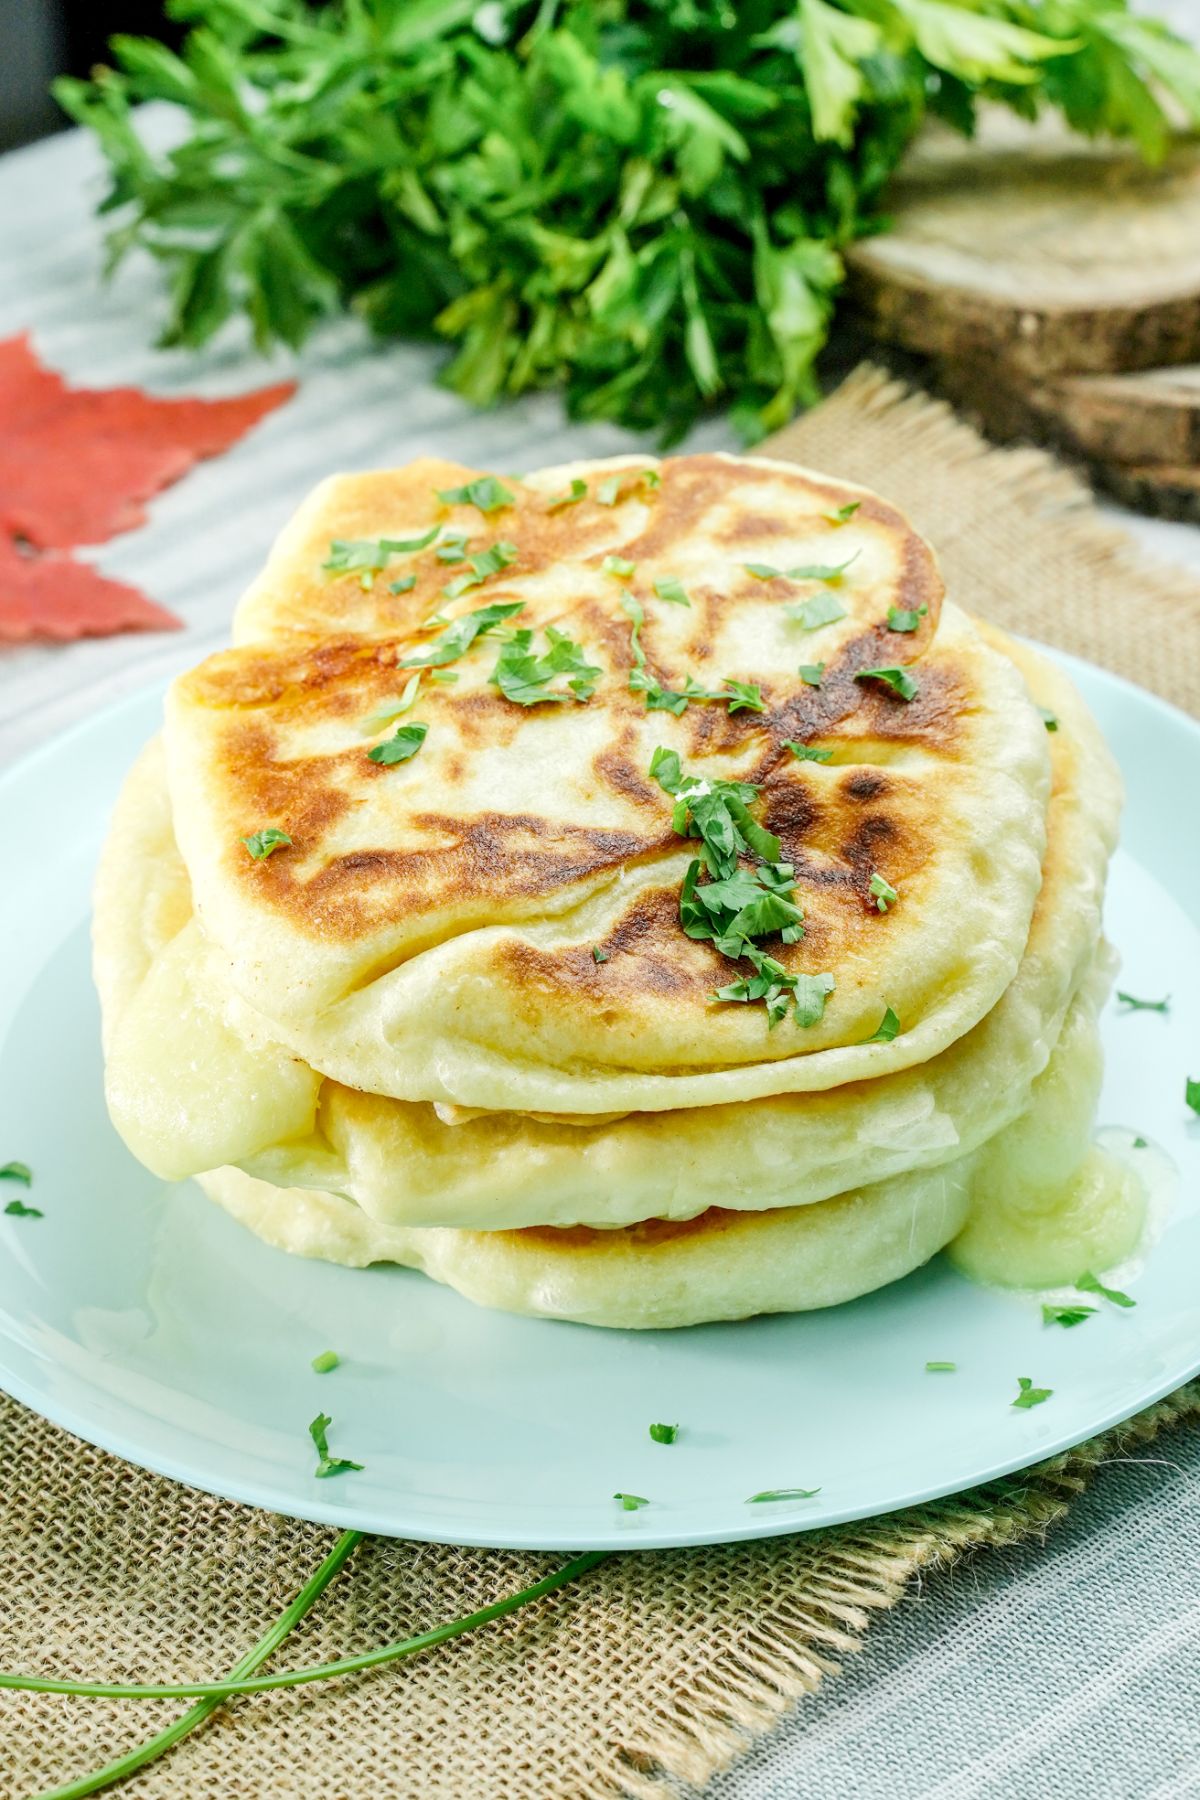 light teal plate holding stack of Russian cheese piroshki